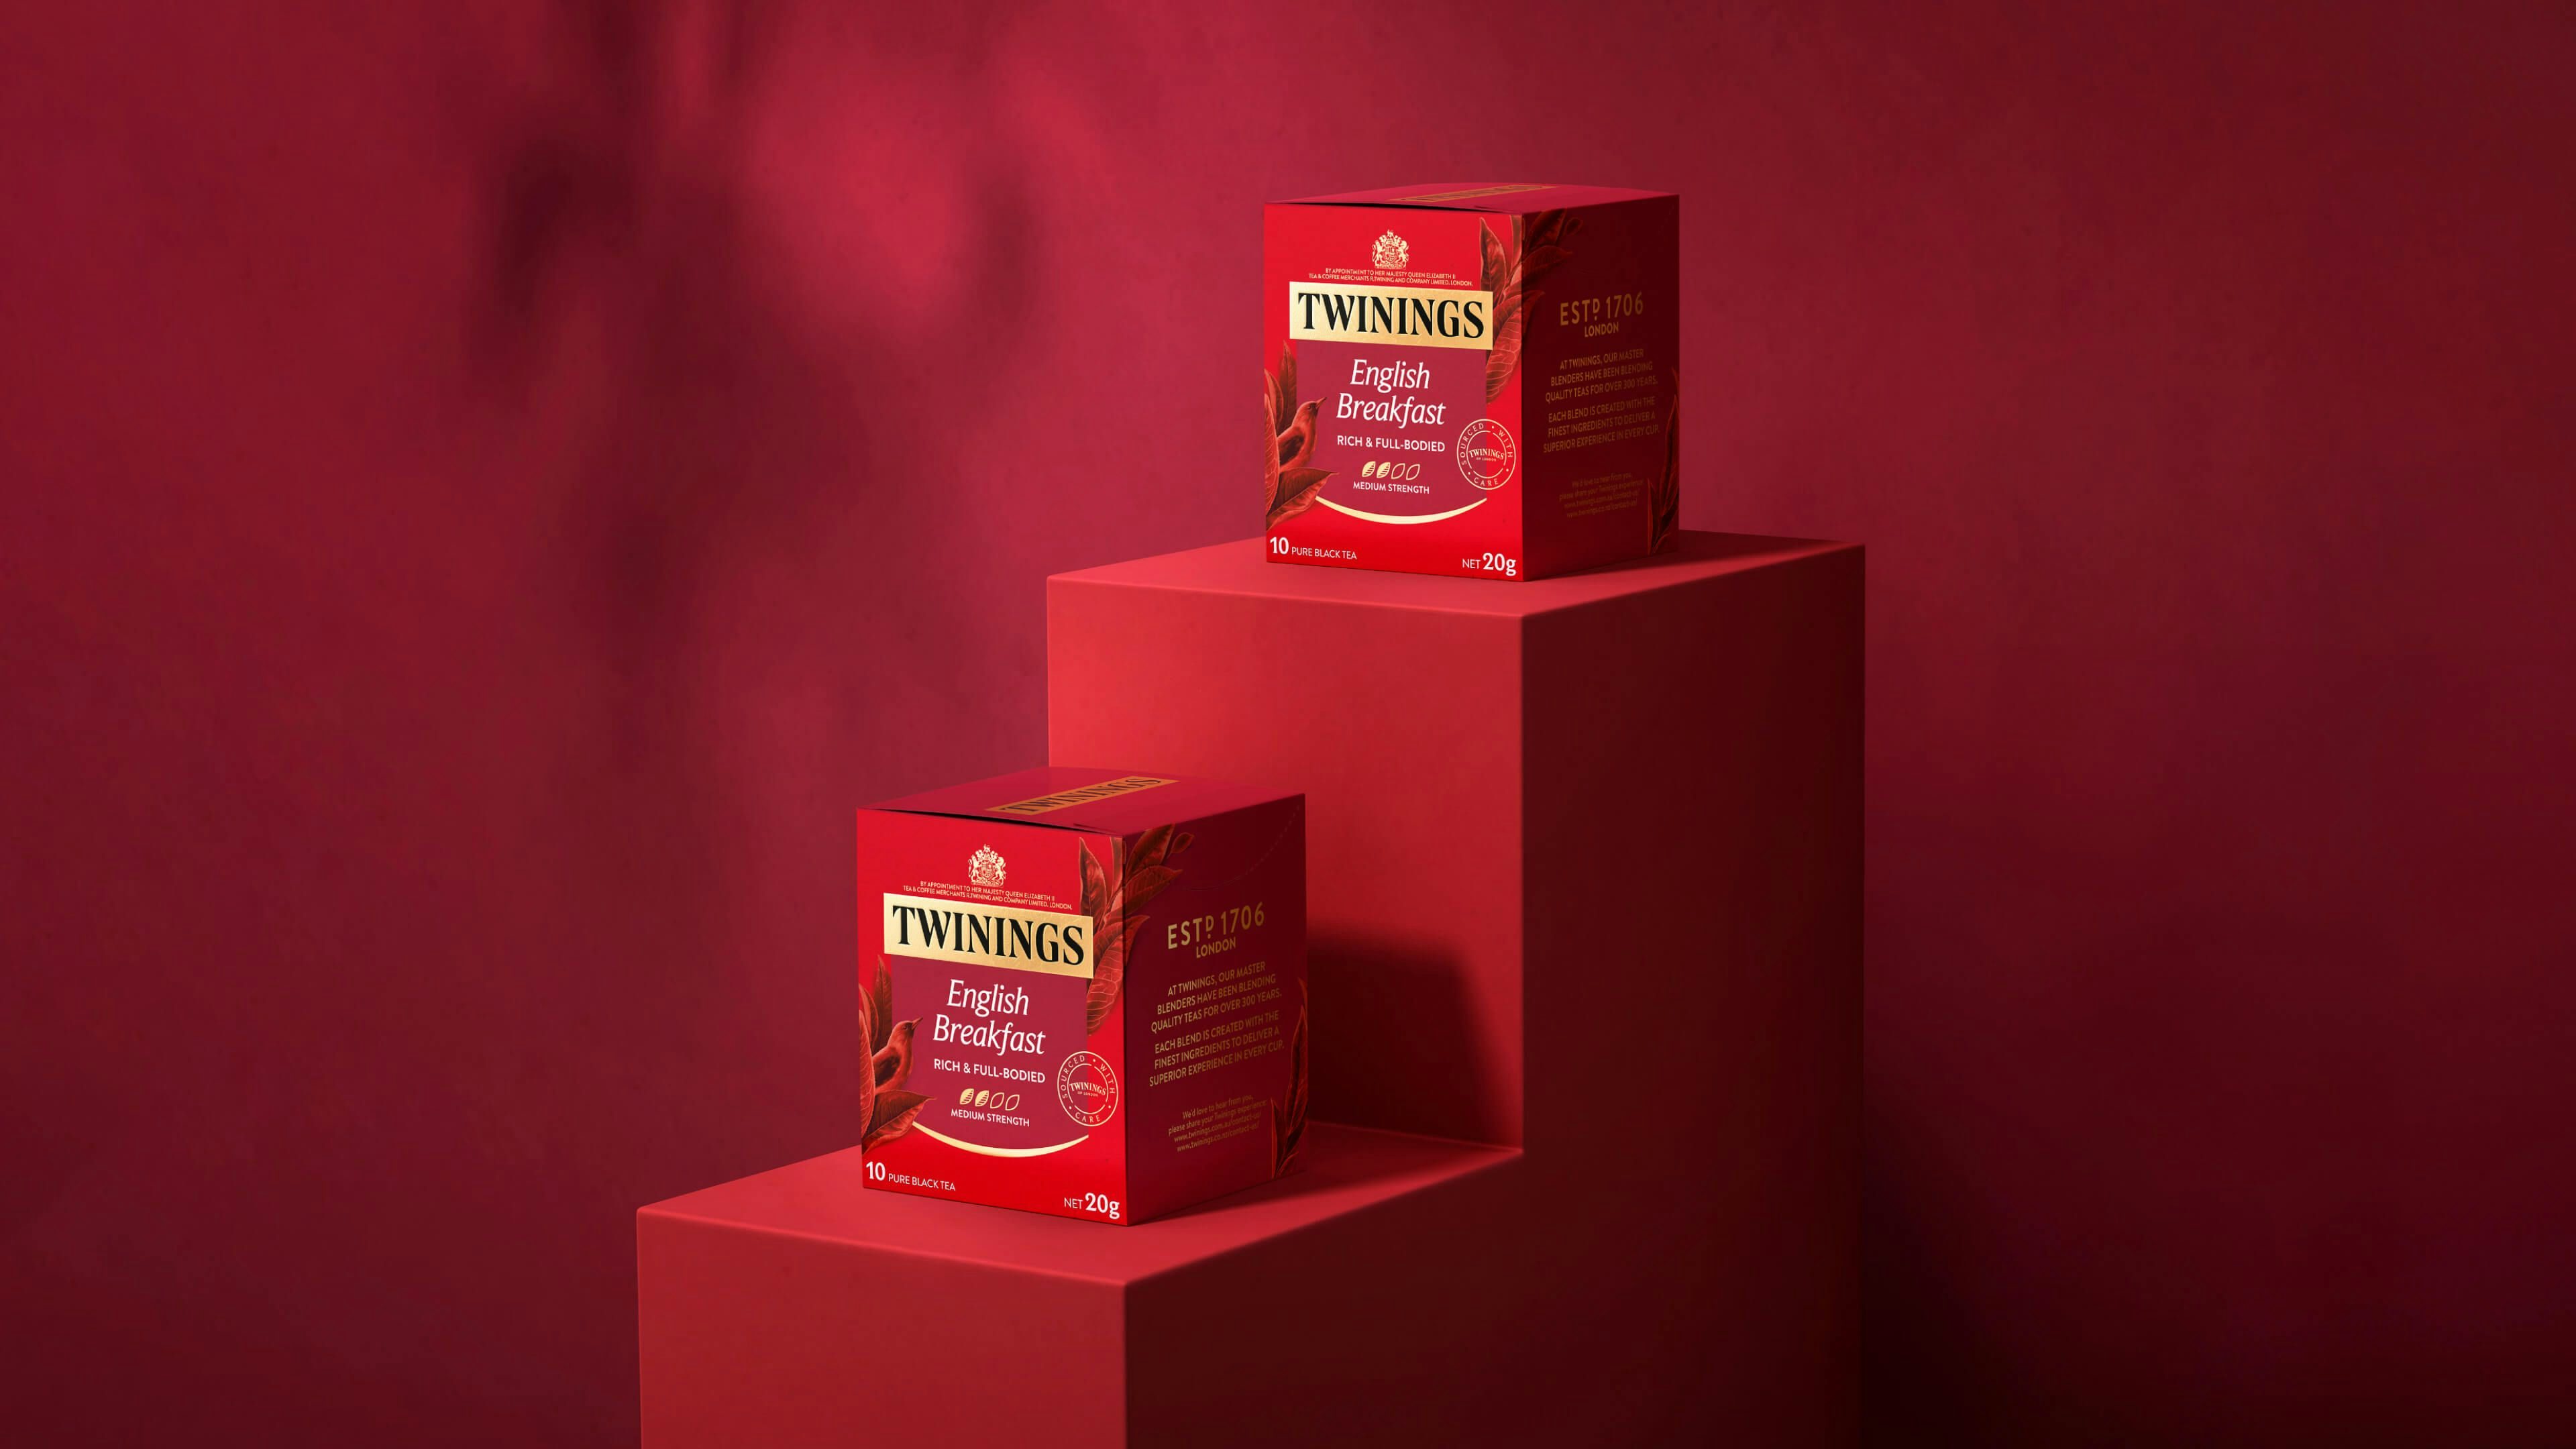 Thumbnail image for project: Twinings